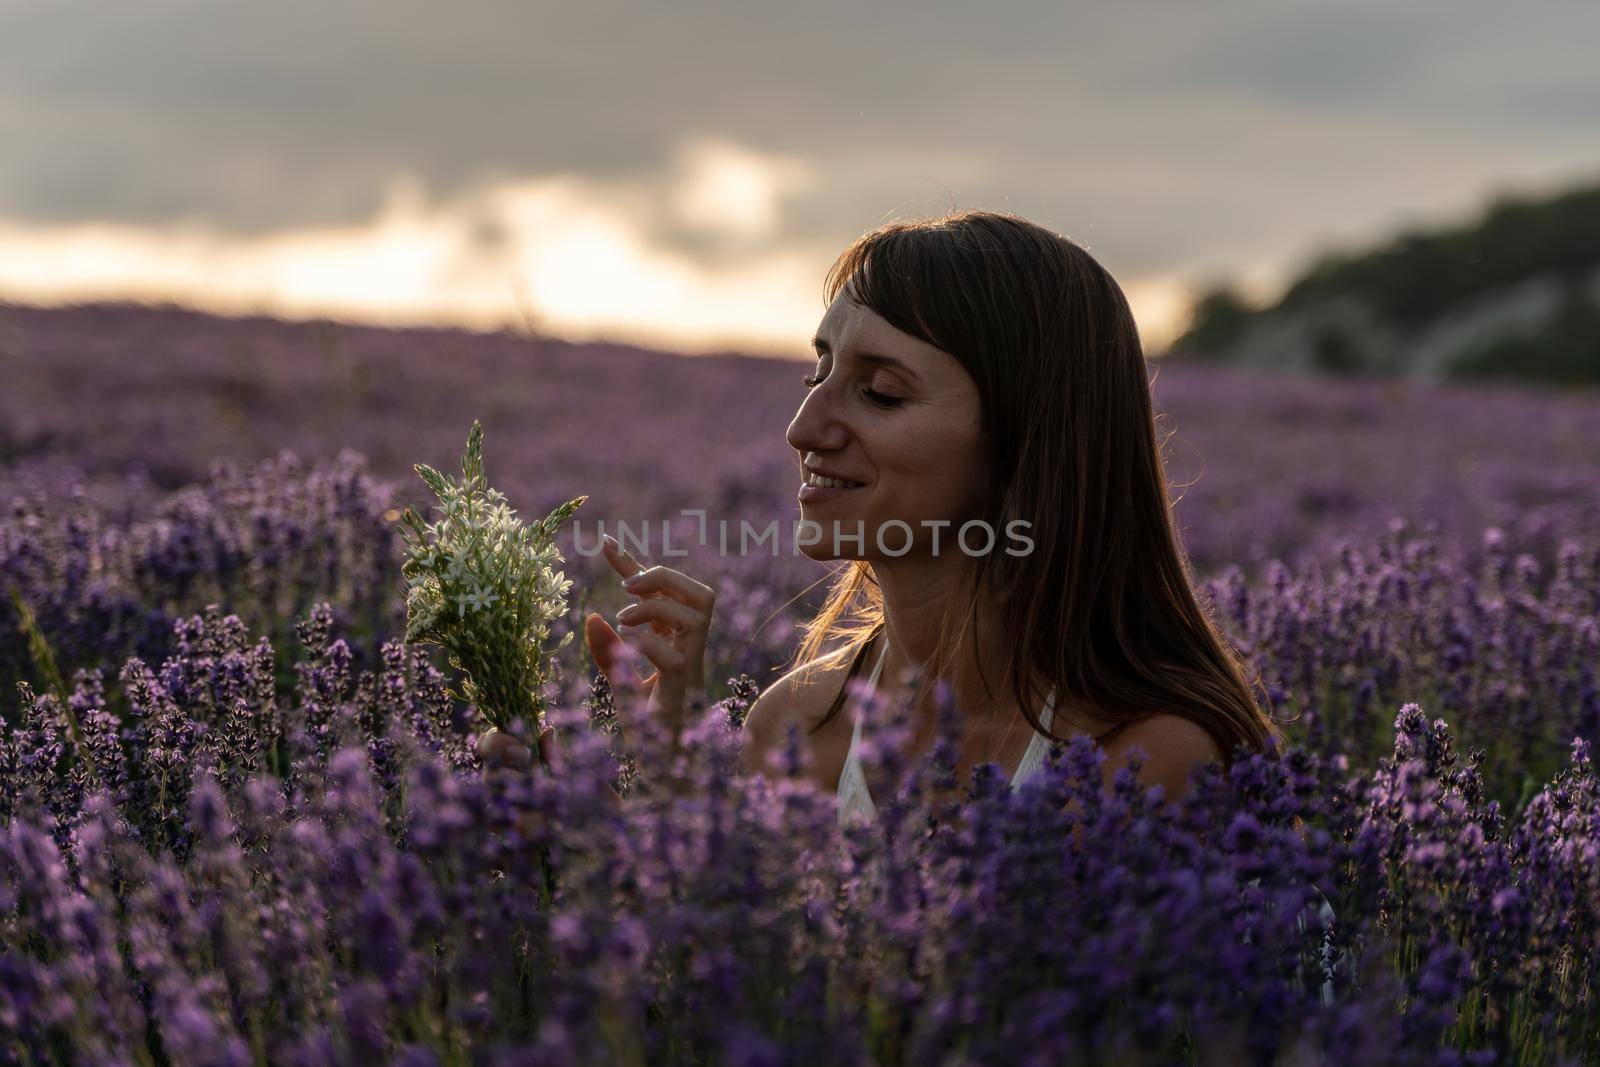 Close up portrait of happy young brunette woman in white dress on blooming fragrant lavender fields with endless rows. Warm sunset light. Bushes of lavender purple aromatic flowers on lavender fields. by panophotograph